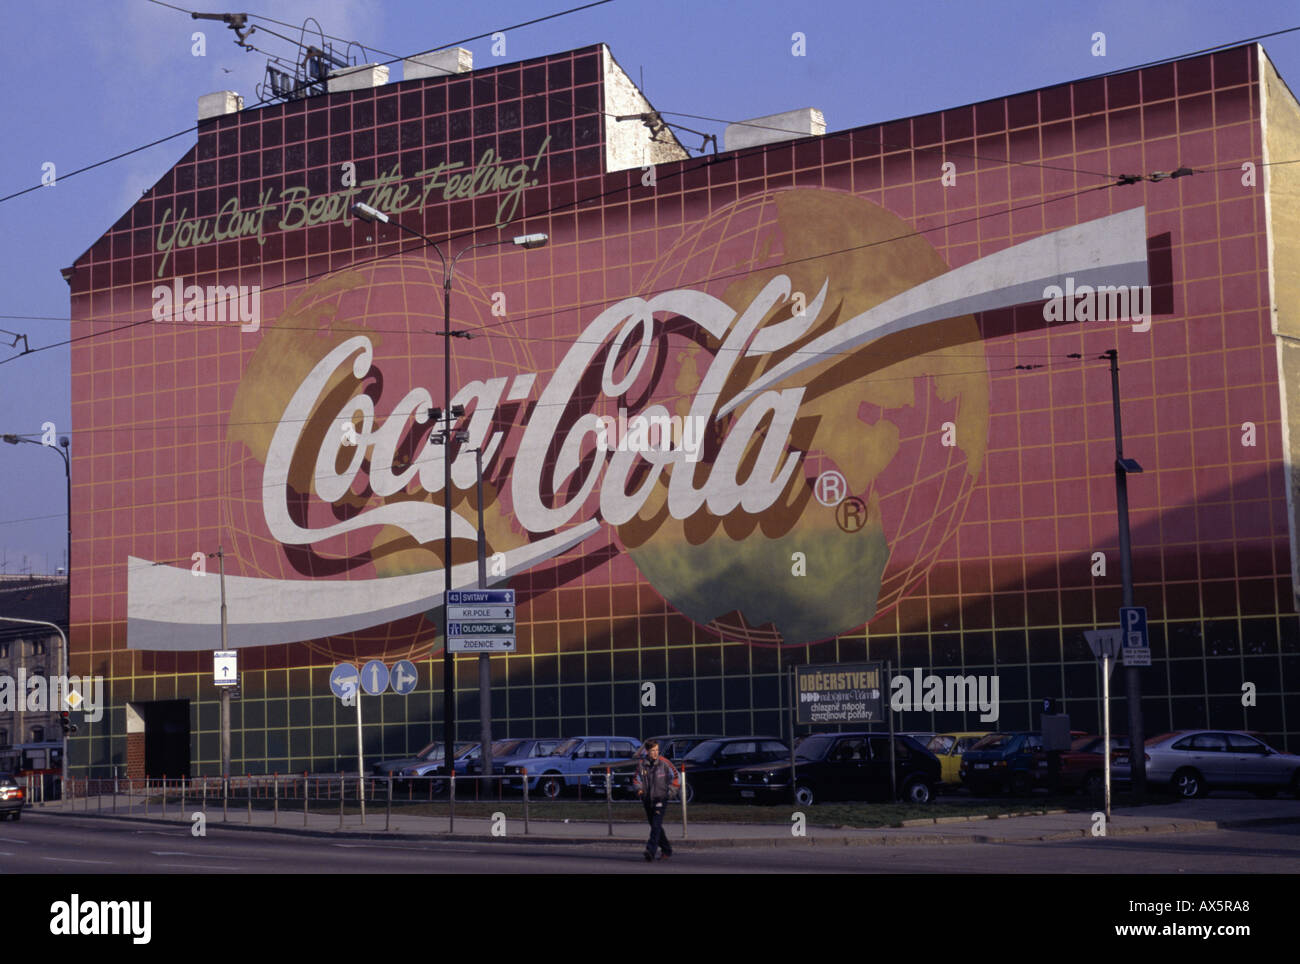 Prague, Czech Republic. Massive 'Coca - Cola' advertisement on a wall; signs in Czech under; cars parked. Stock Photo